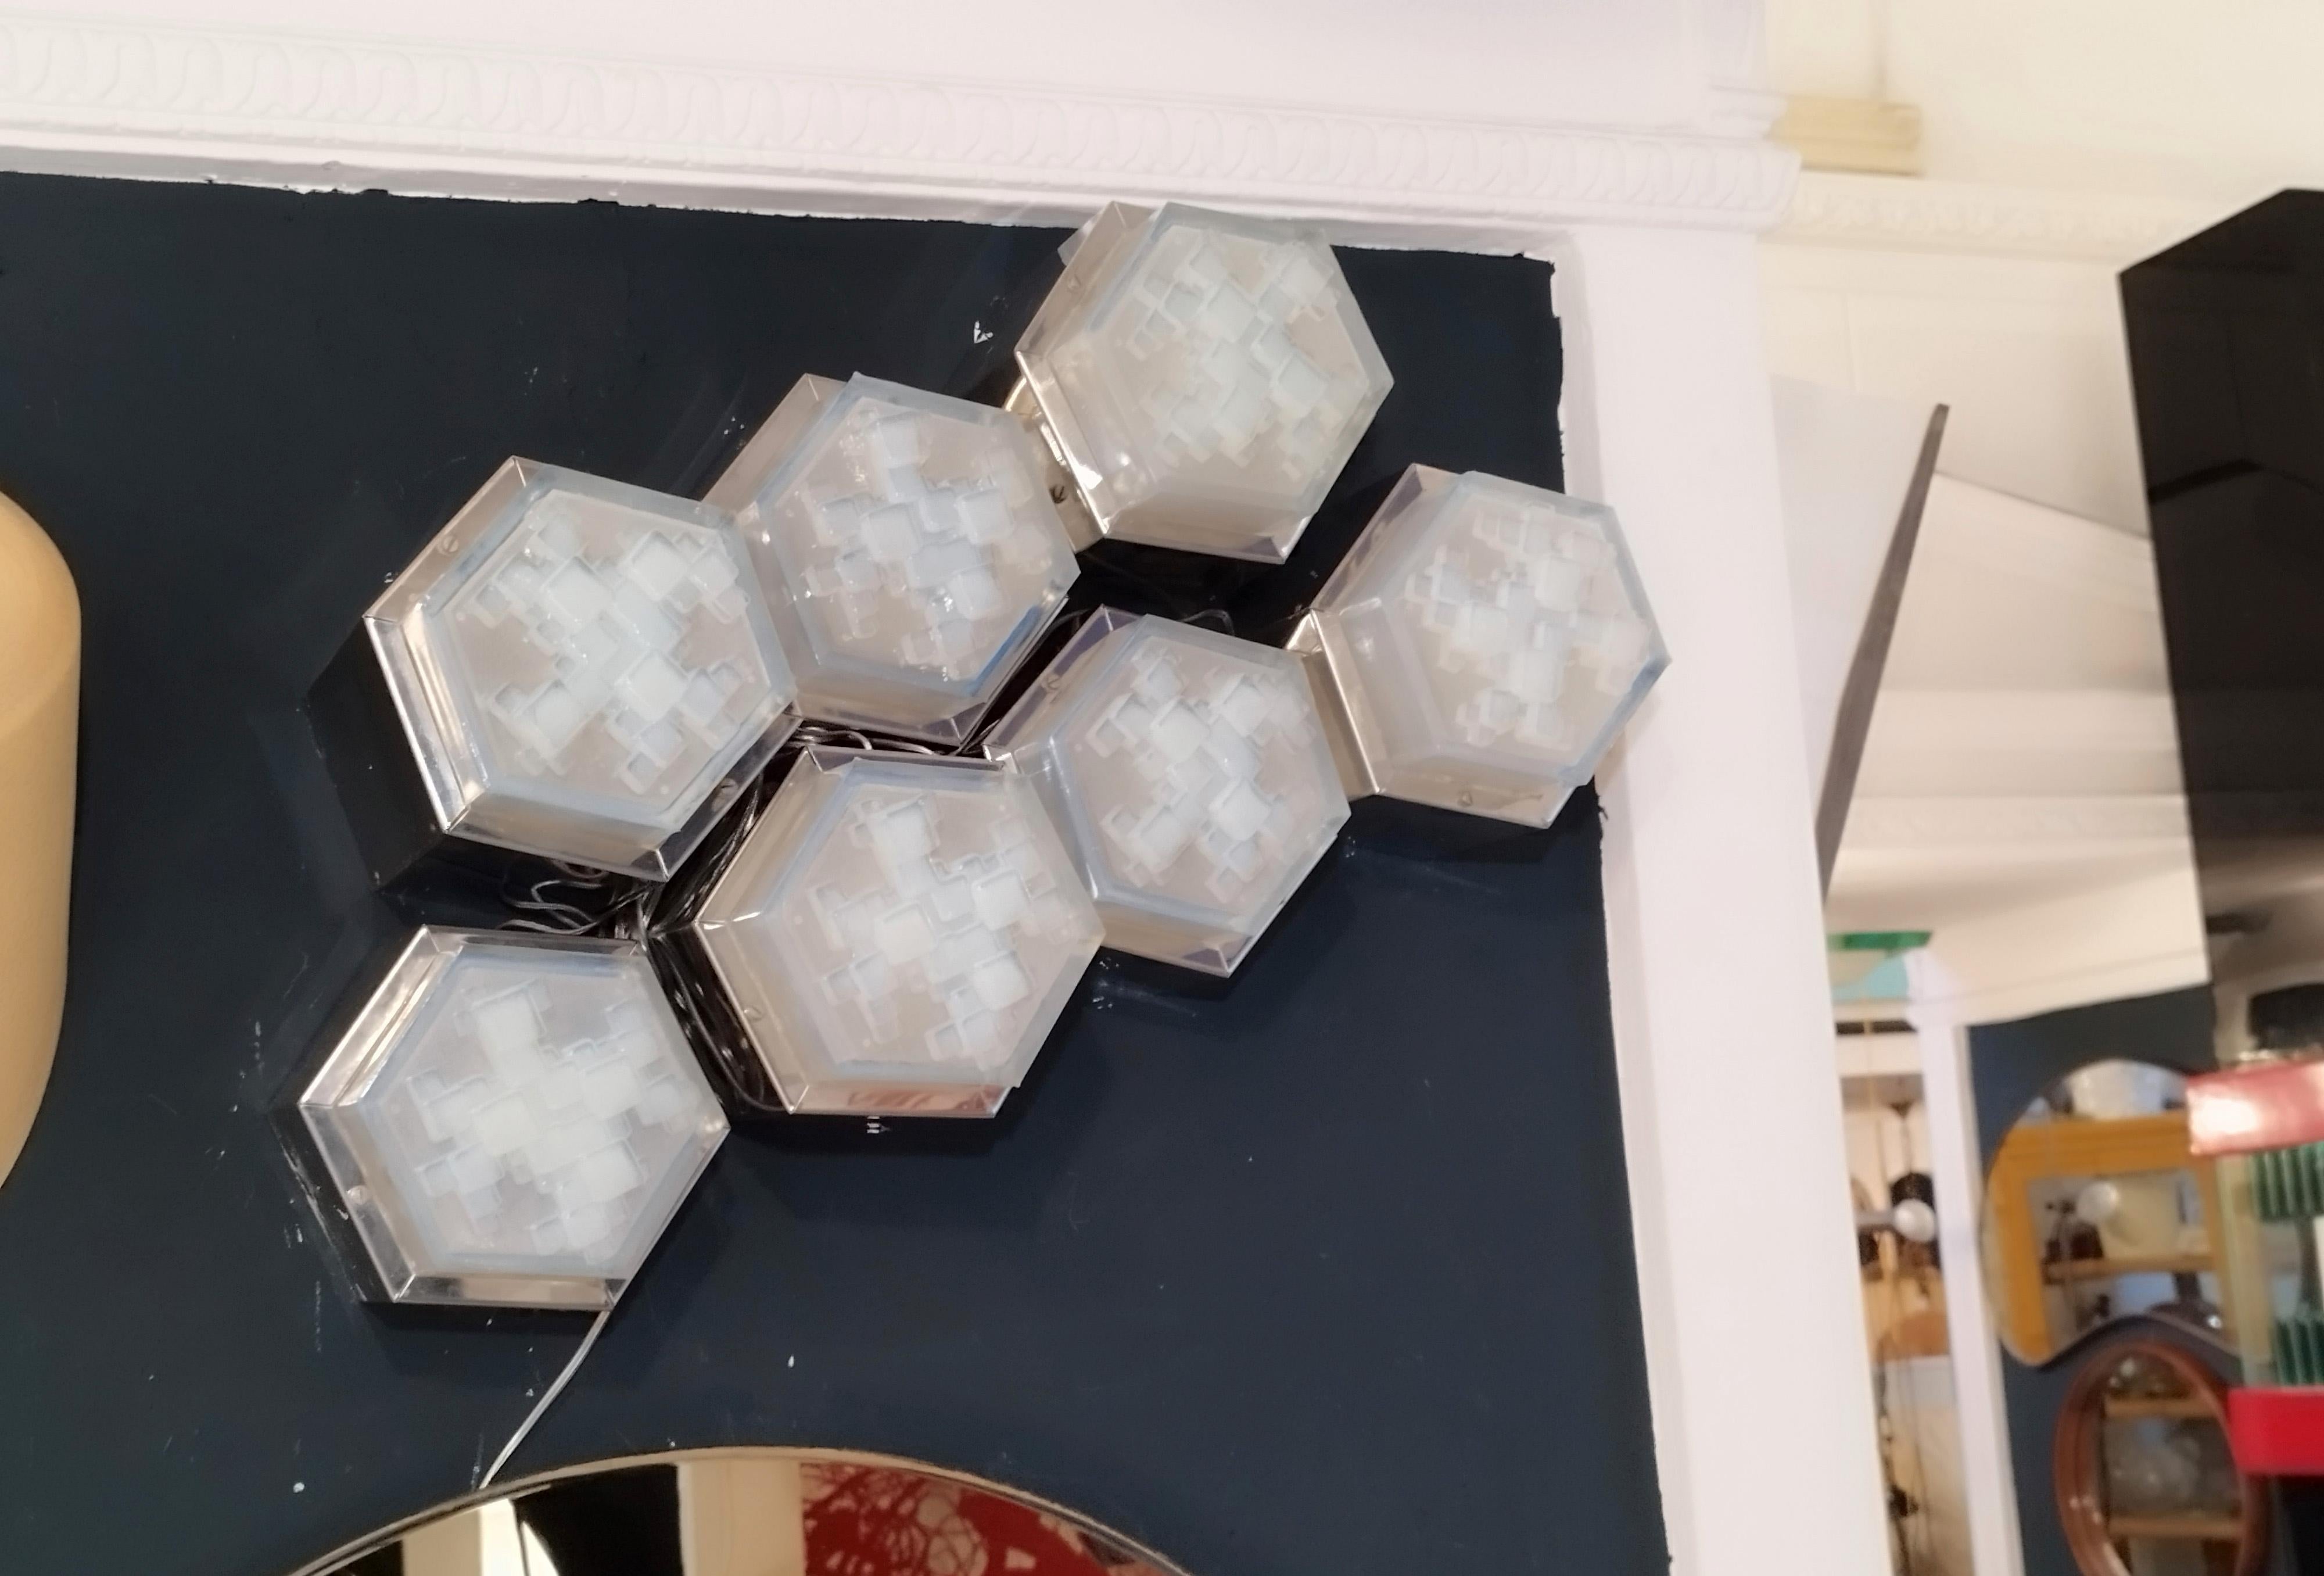 Modular wall or recessed sconces with hexagonal steel frame and hexagonal frosted blue glass diffuser designed by Albano Poli for Poliarte
The set consists of 7 lamps of different sizes:
1 lamp cm. h.21x18x14
3 lamps cm. h.17x16x14
3 lamps cm.